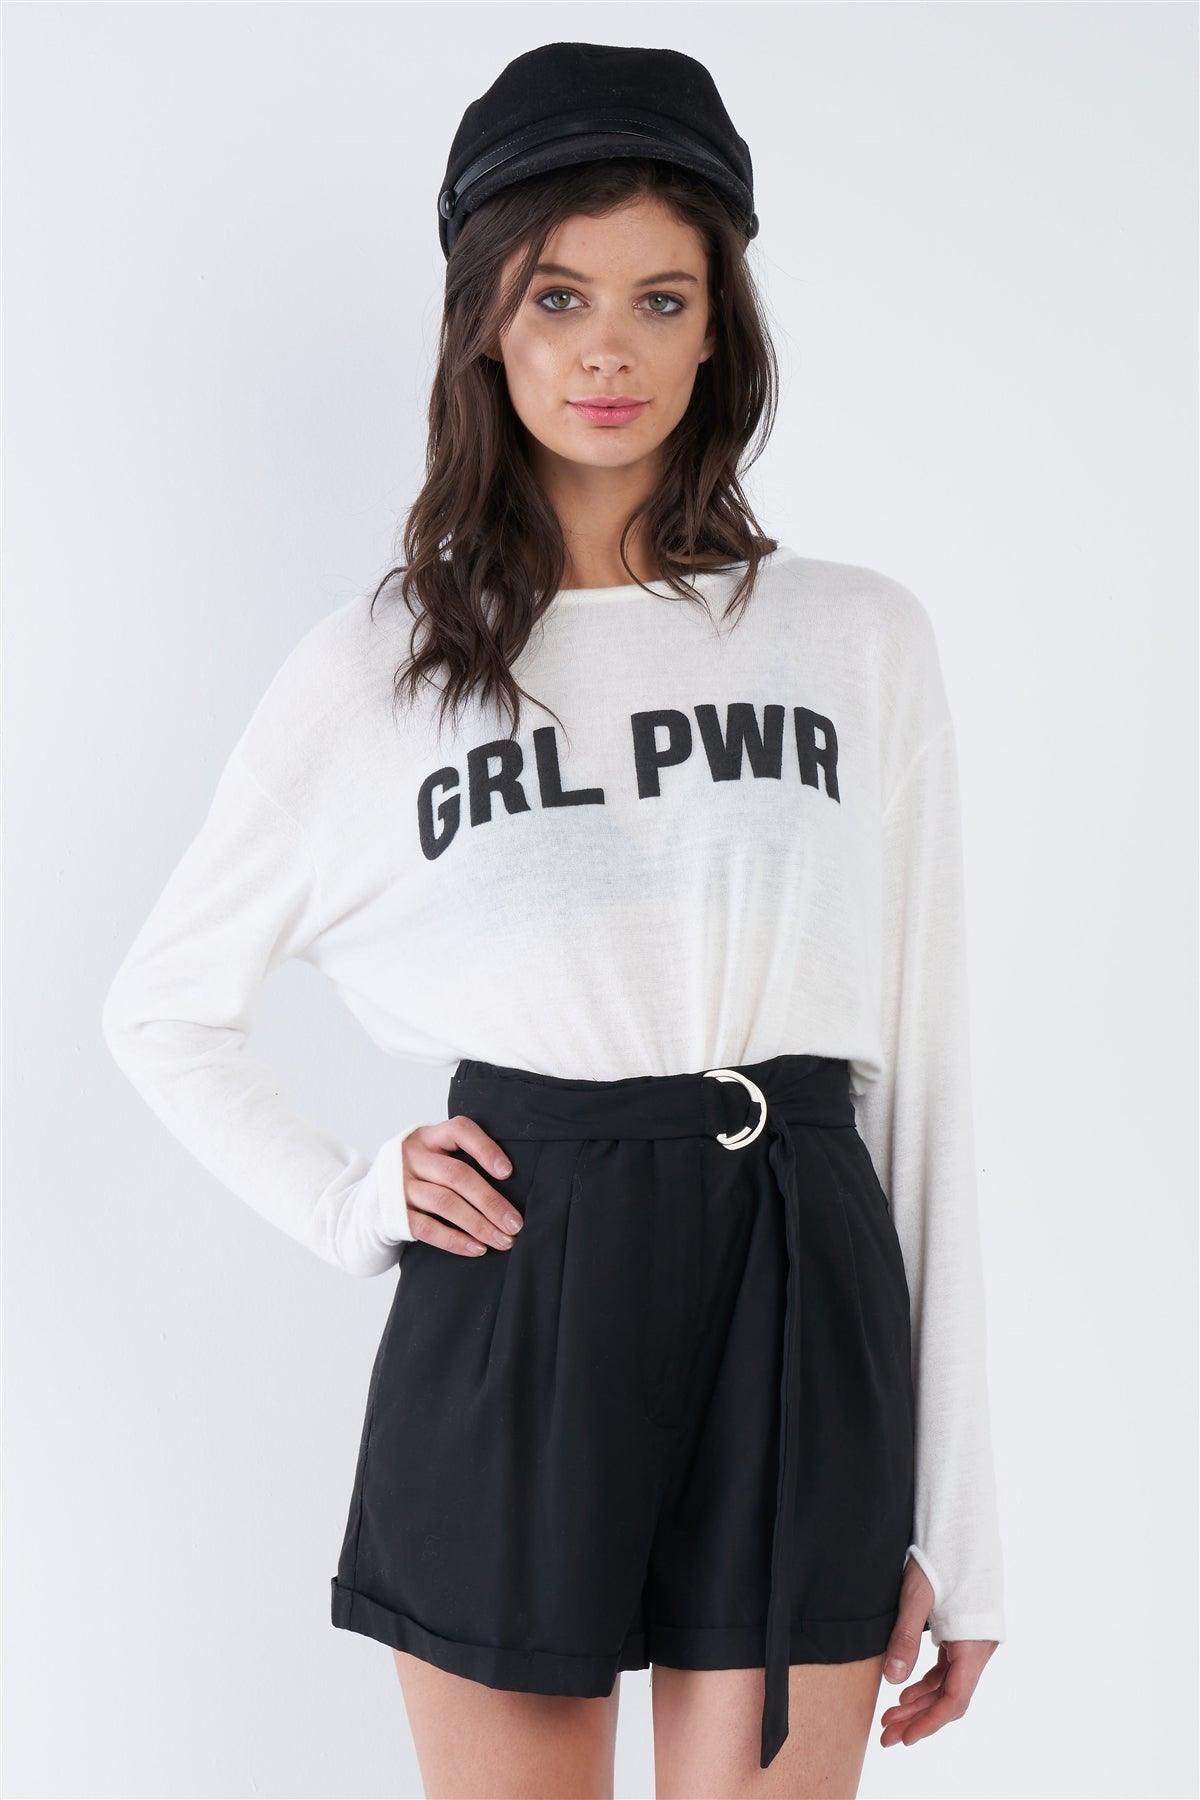 Off-White "GRL PWR" Long Sleeve Thumb Hole Top